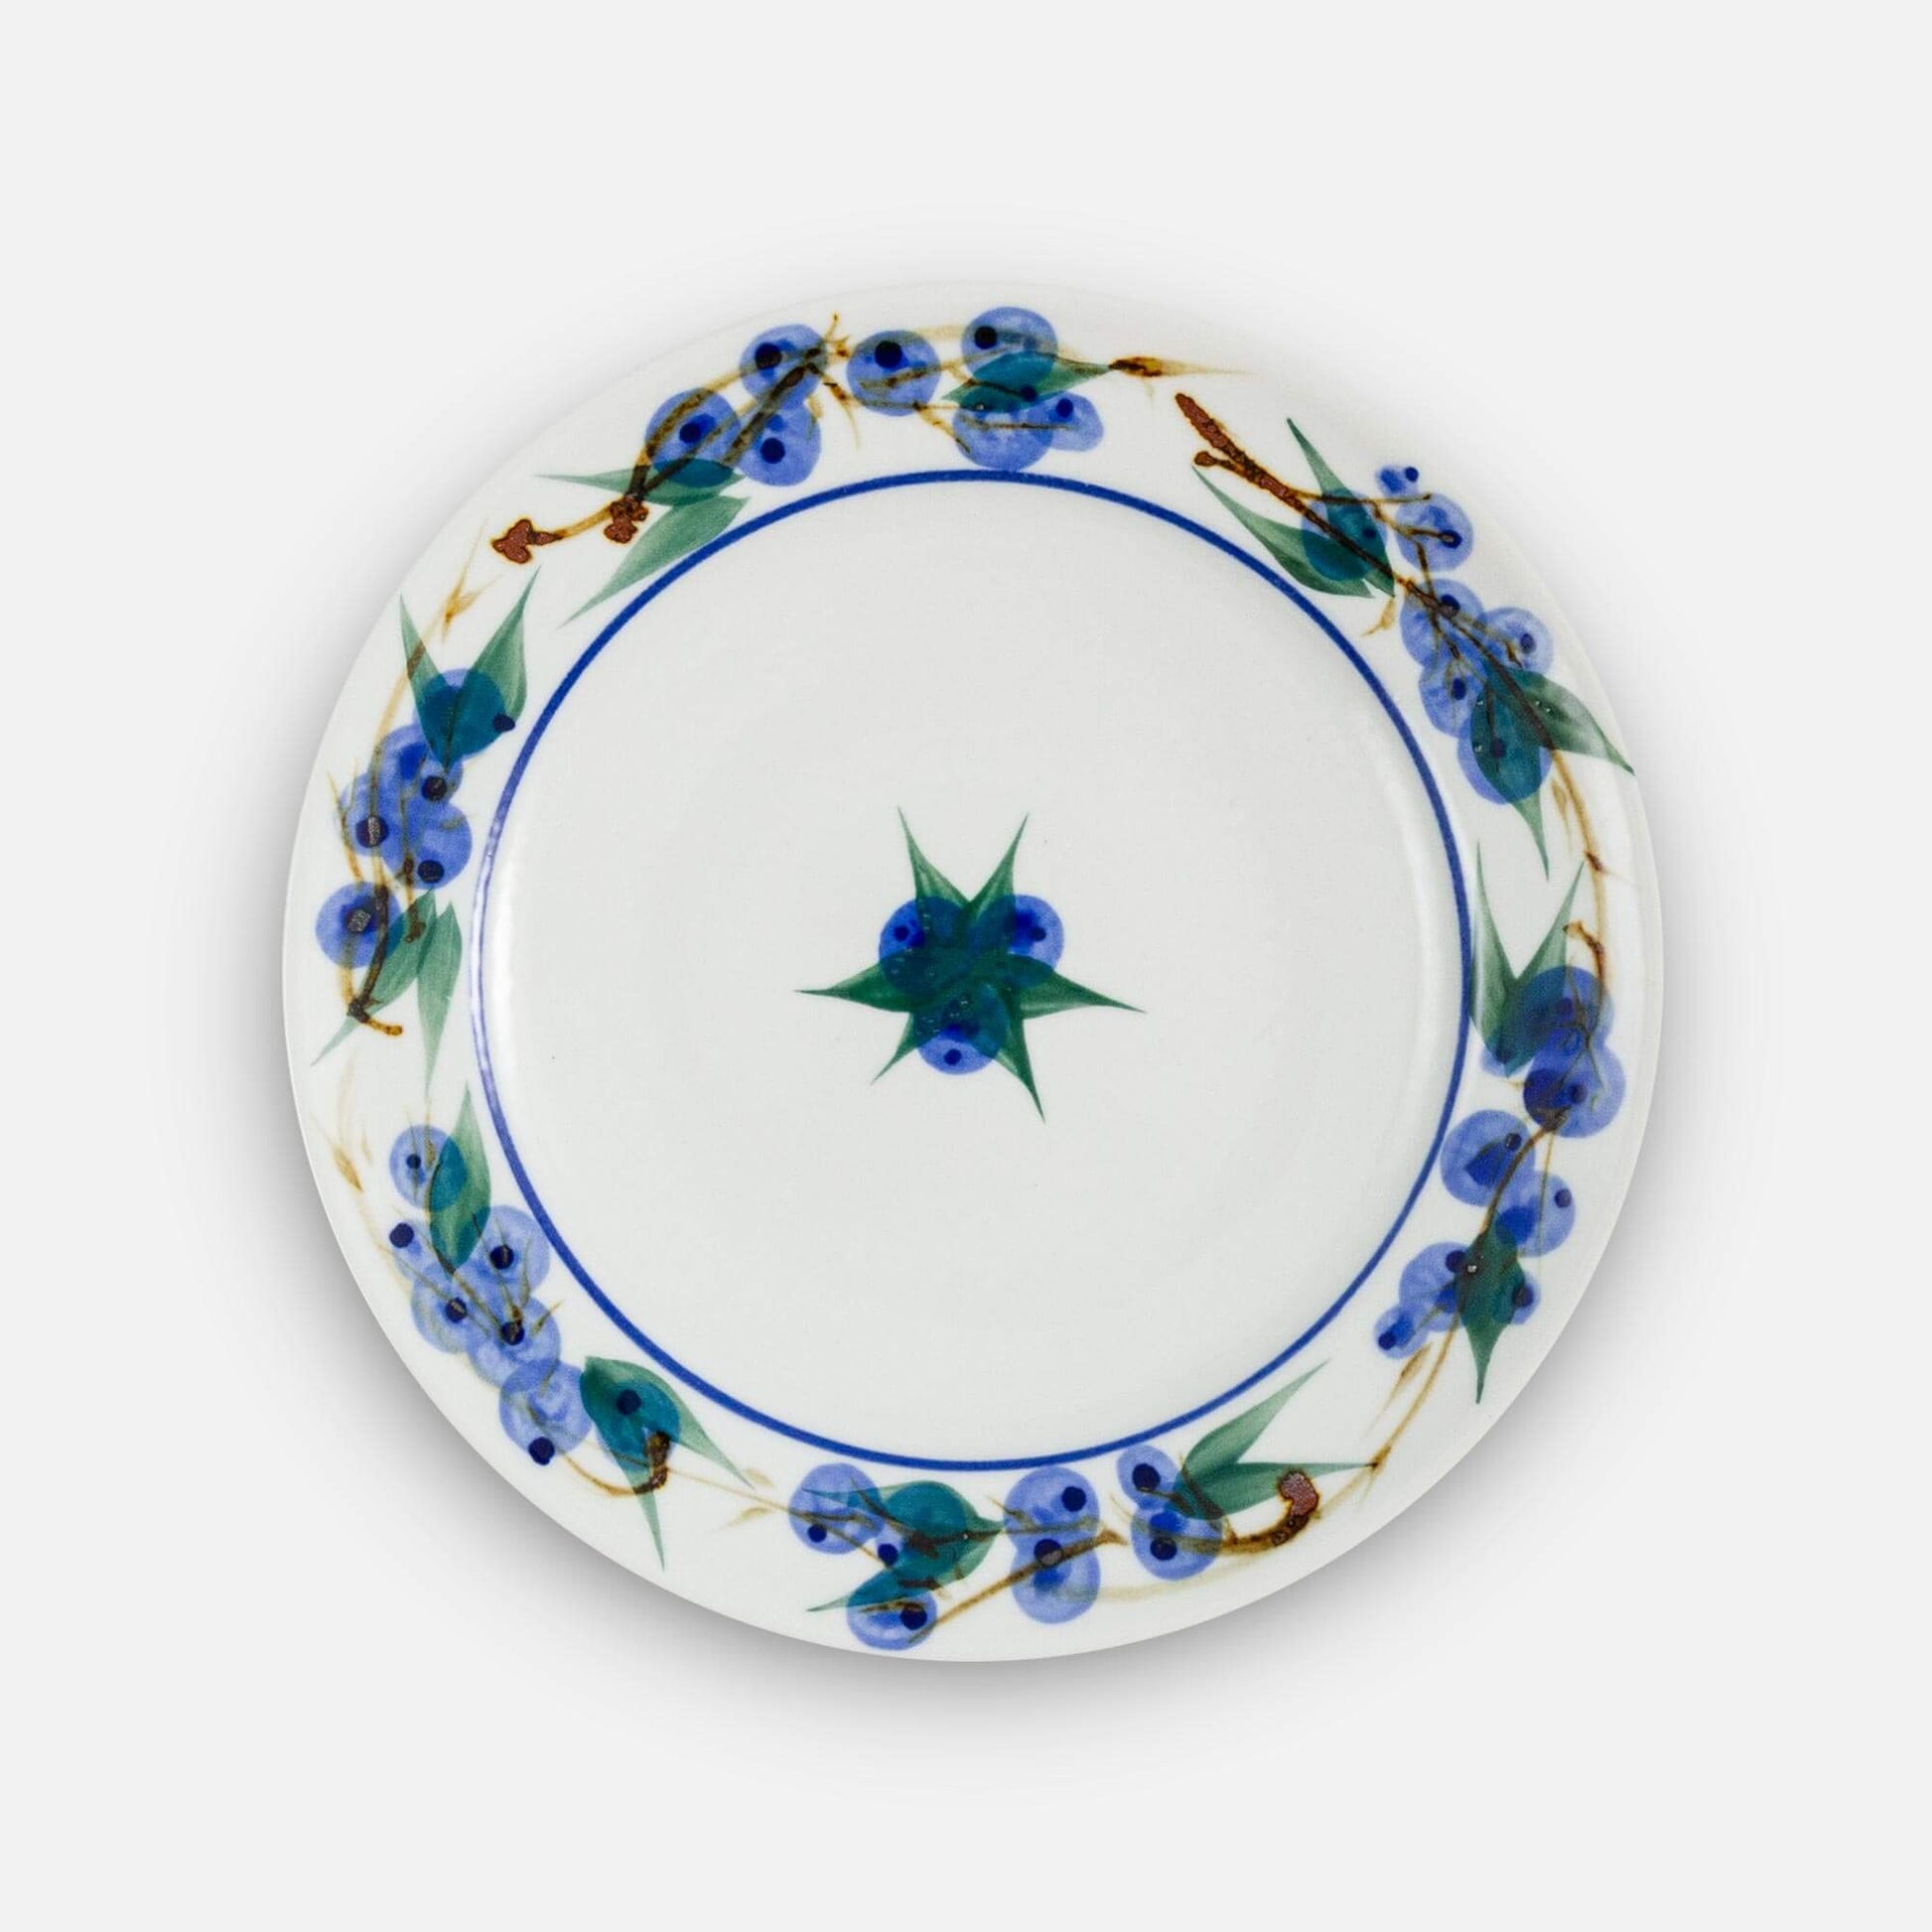 Handmade Pottery Footed Dinner Plate in Blueberry pattern made by Georgetown Pottery in Maine